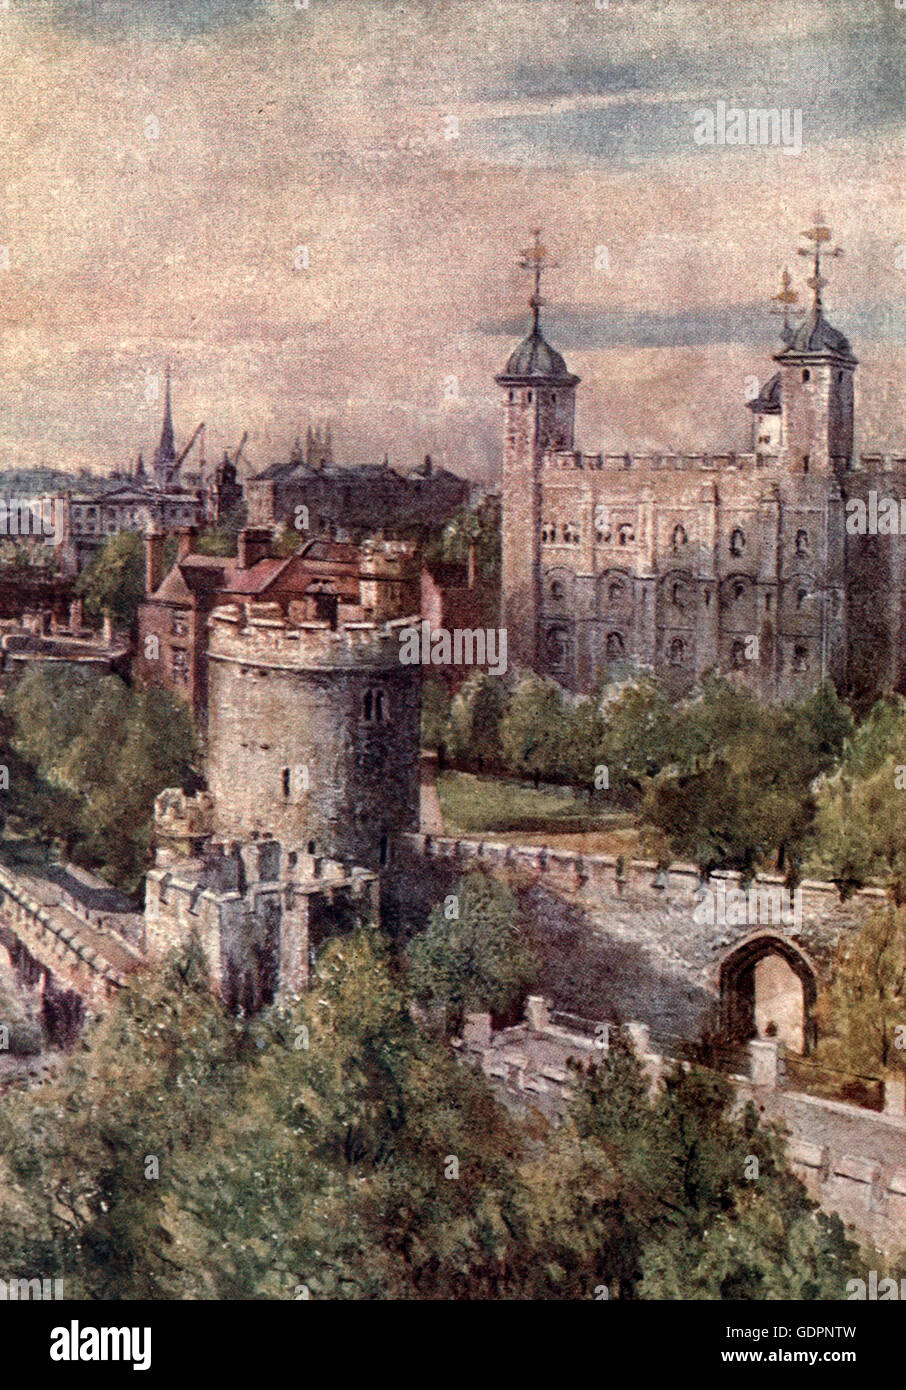 The White Tower (Keep), with the Lanthorn Tower in the foreground, from the Tower Bridge - Tower of London, circa 1908 Stock Photo